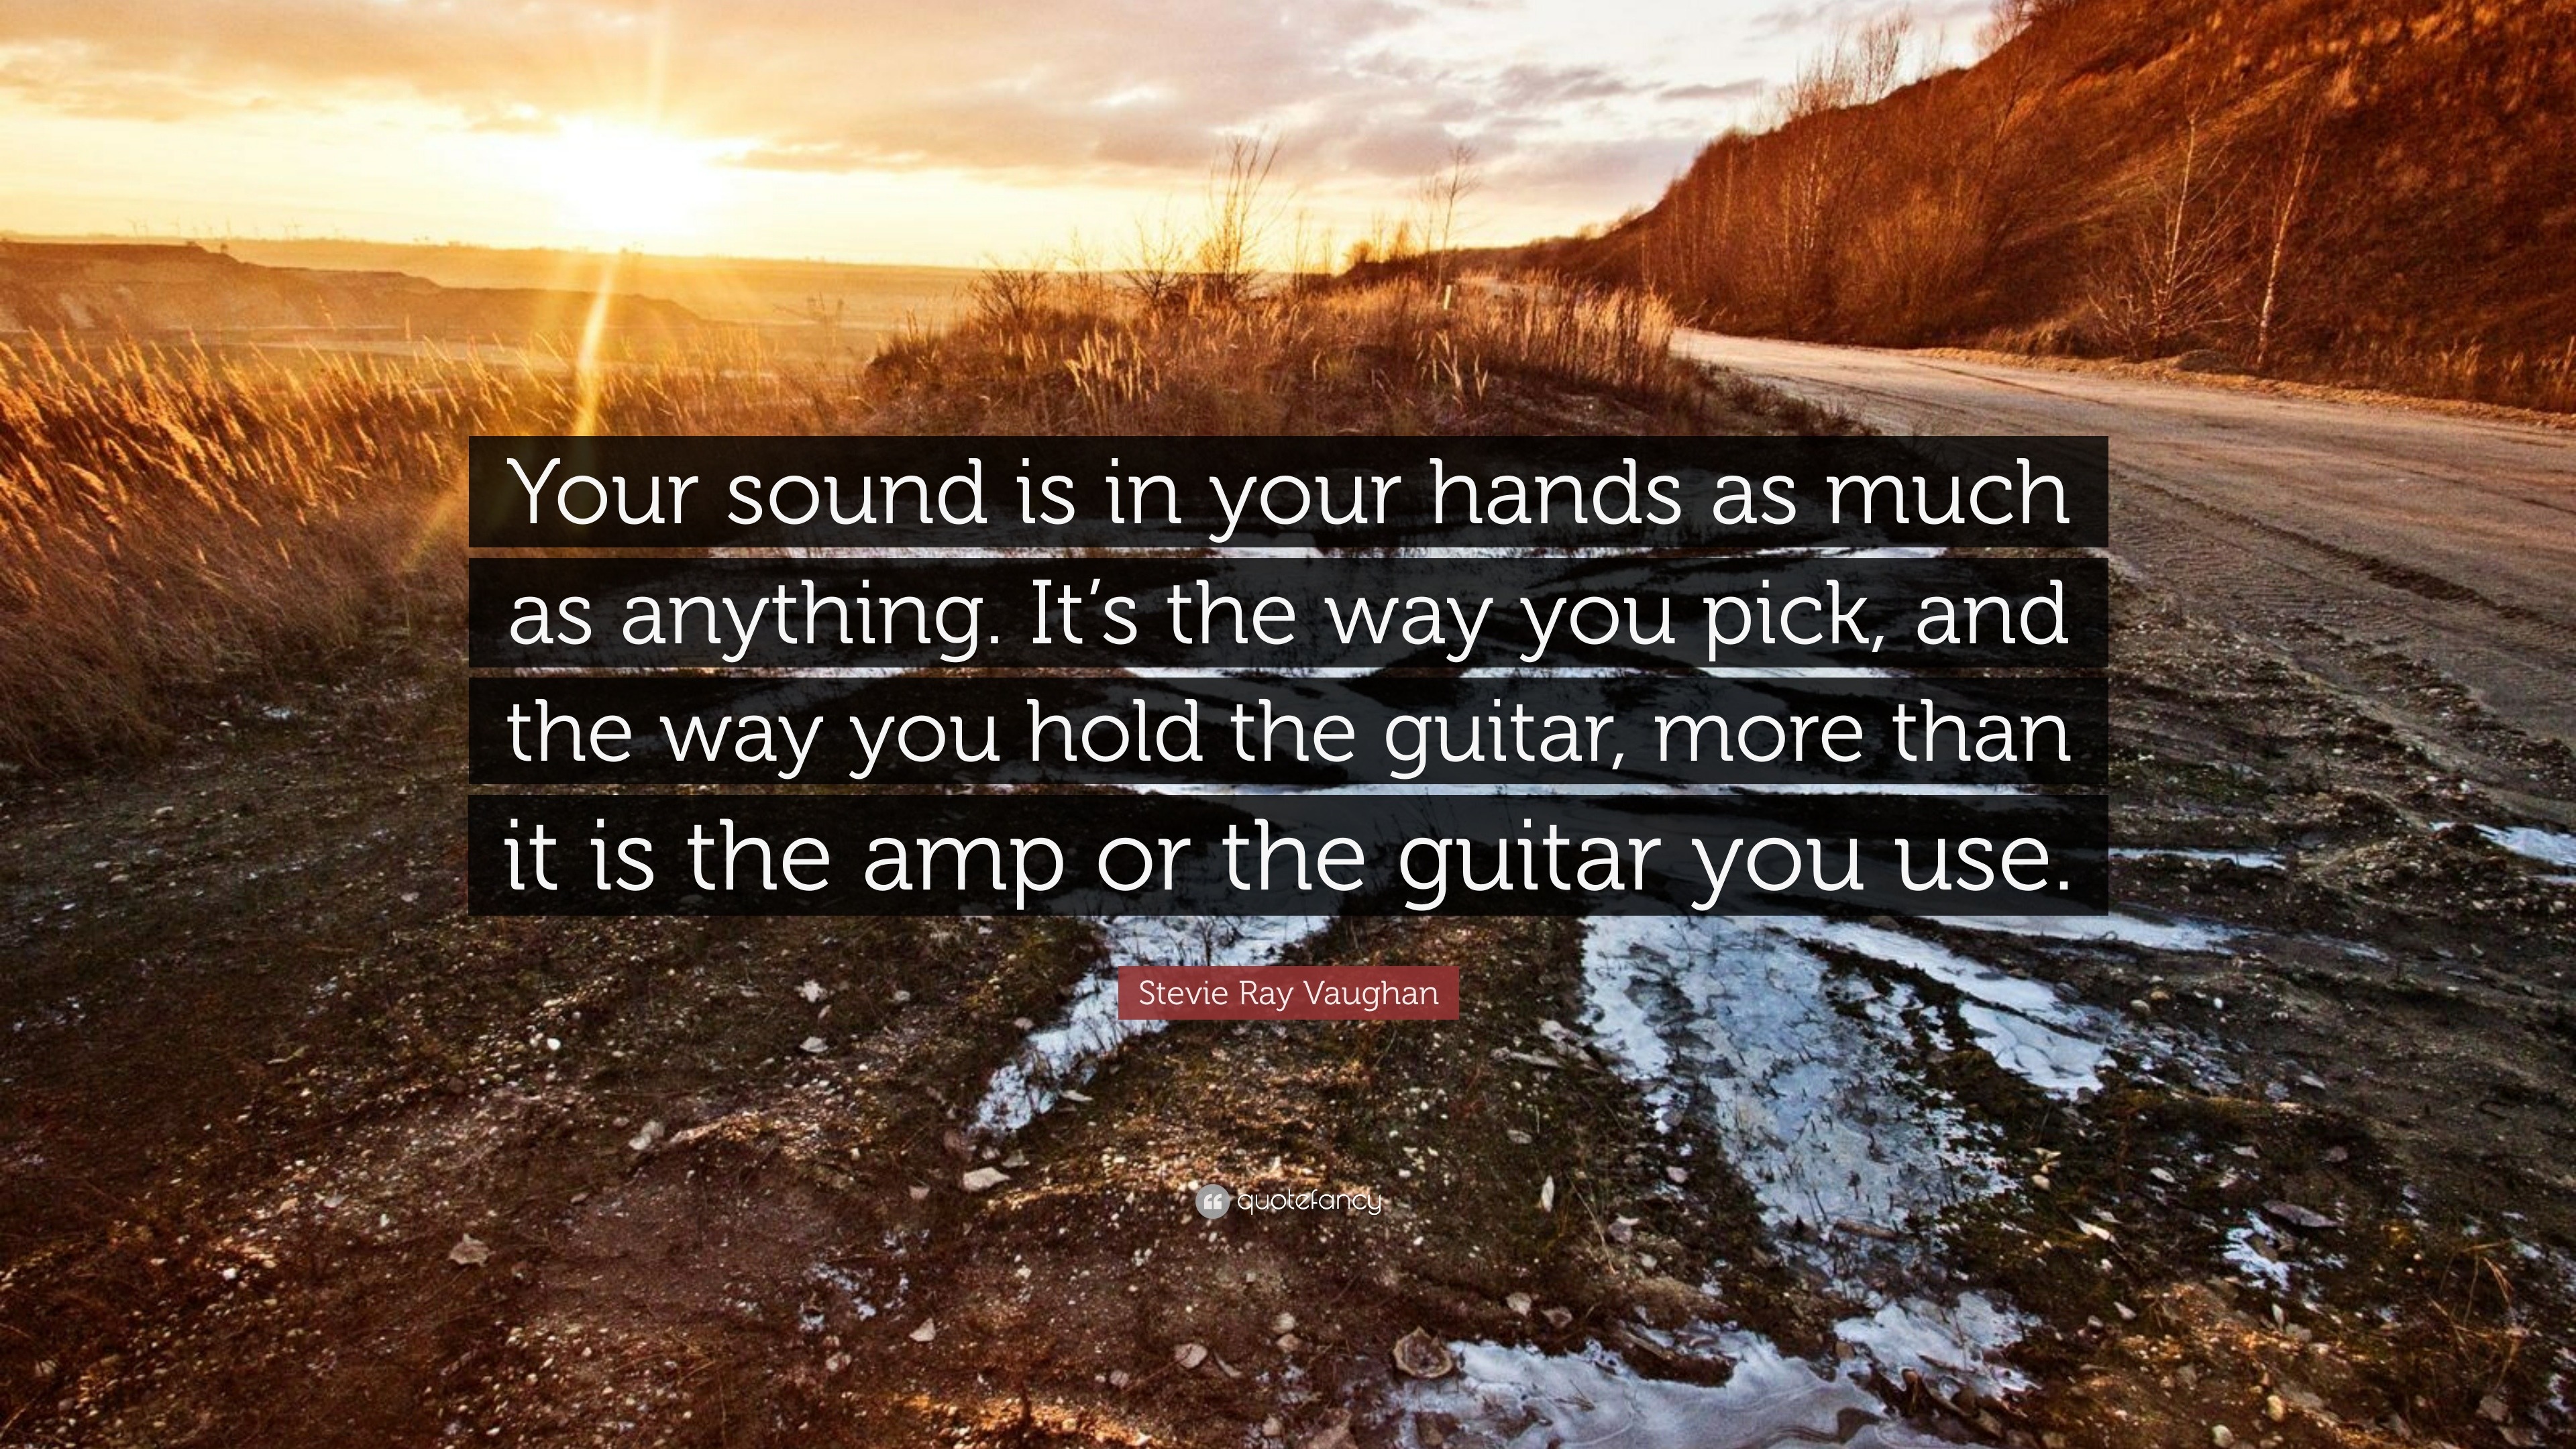 Stevie Ray Vaughan Quote: “Your sound is in your hands as much as